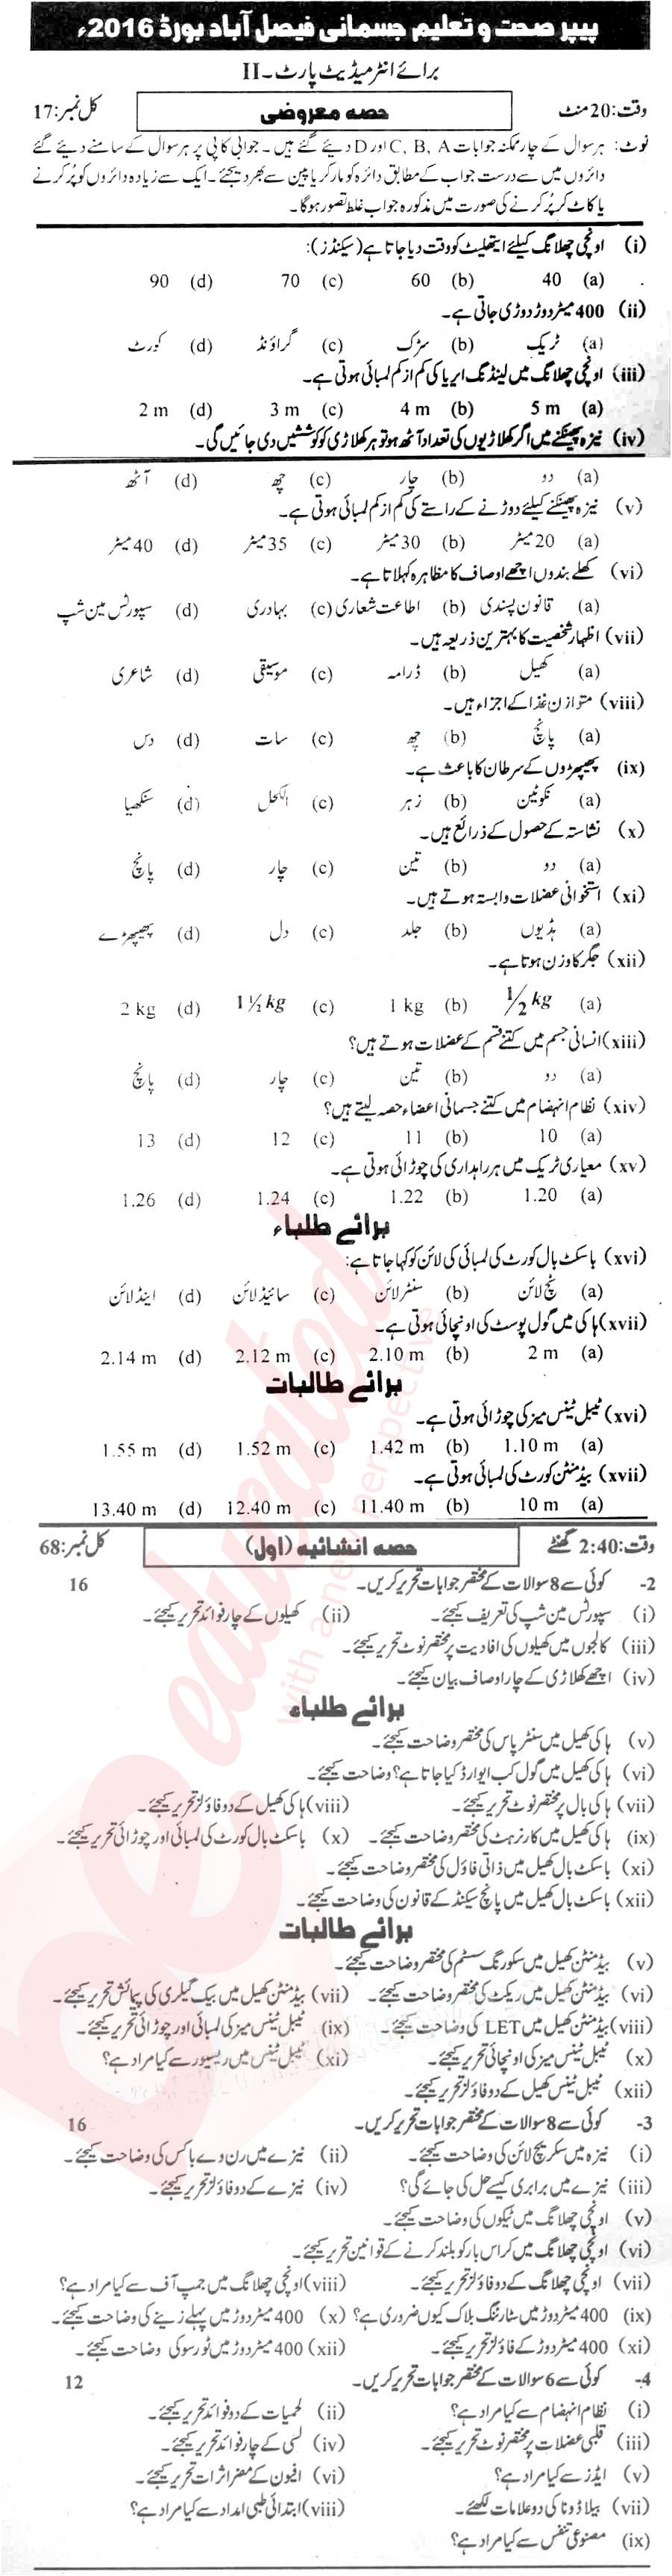 Health and Physical Education FA Part 2 Past Paper Group 1 BISE Faisalabad 2016